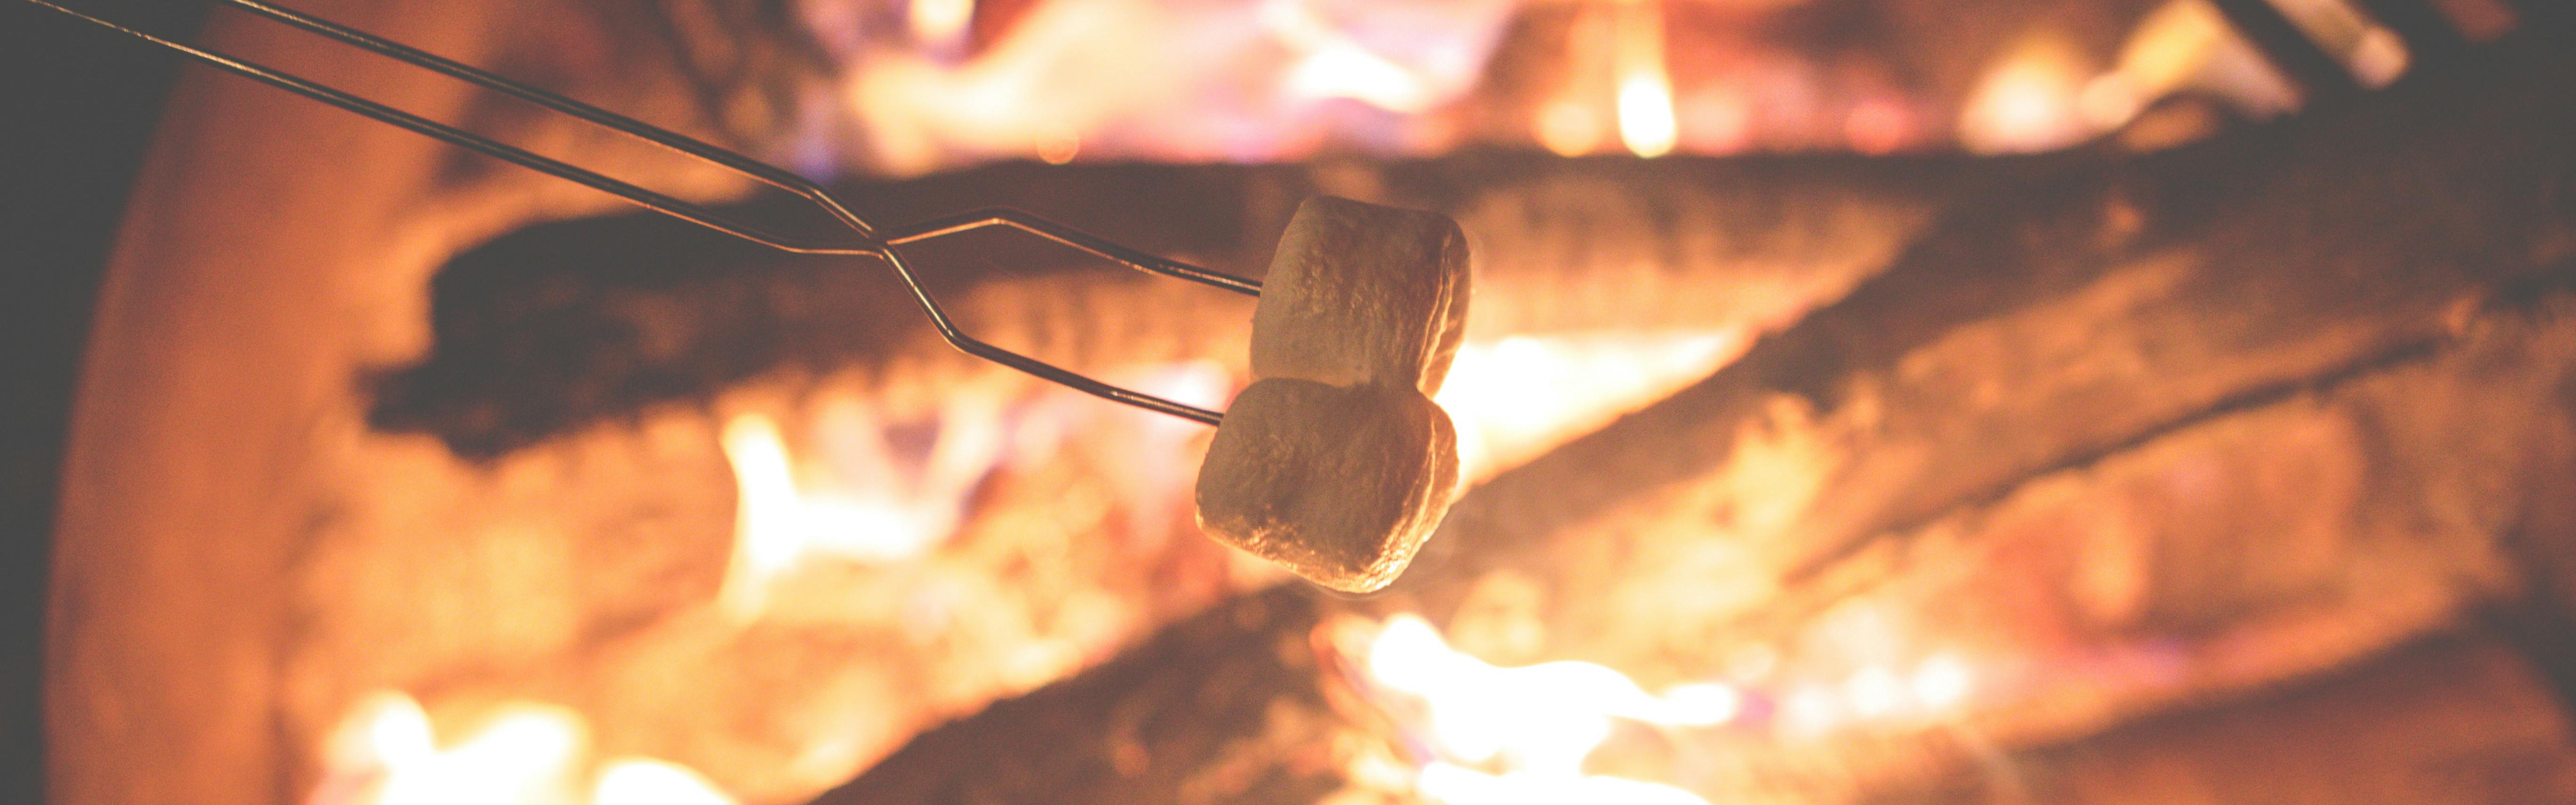 Two marshmallows roasting over a campfire